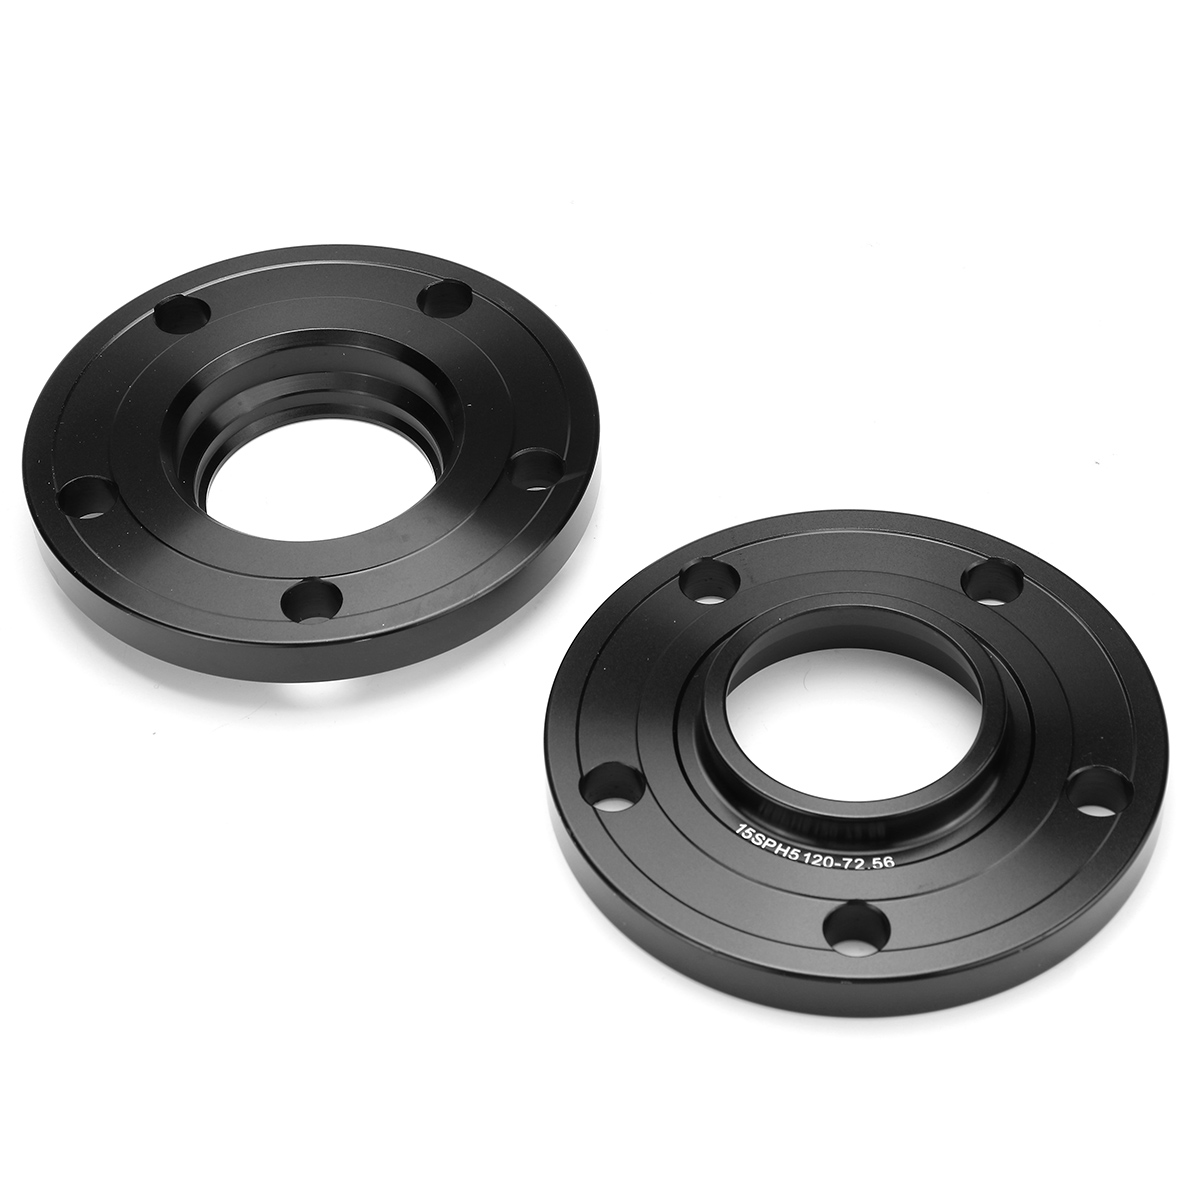 10/15/20mm Car Wheel Spacer Adapters PCD 5x120mm 72.56mm For BMW E82 E88 E30 E36 E46 E28 E34 E90 E91 E92 E93 E60 E61 E31